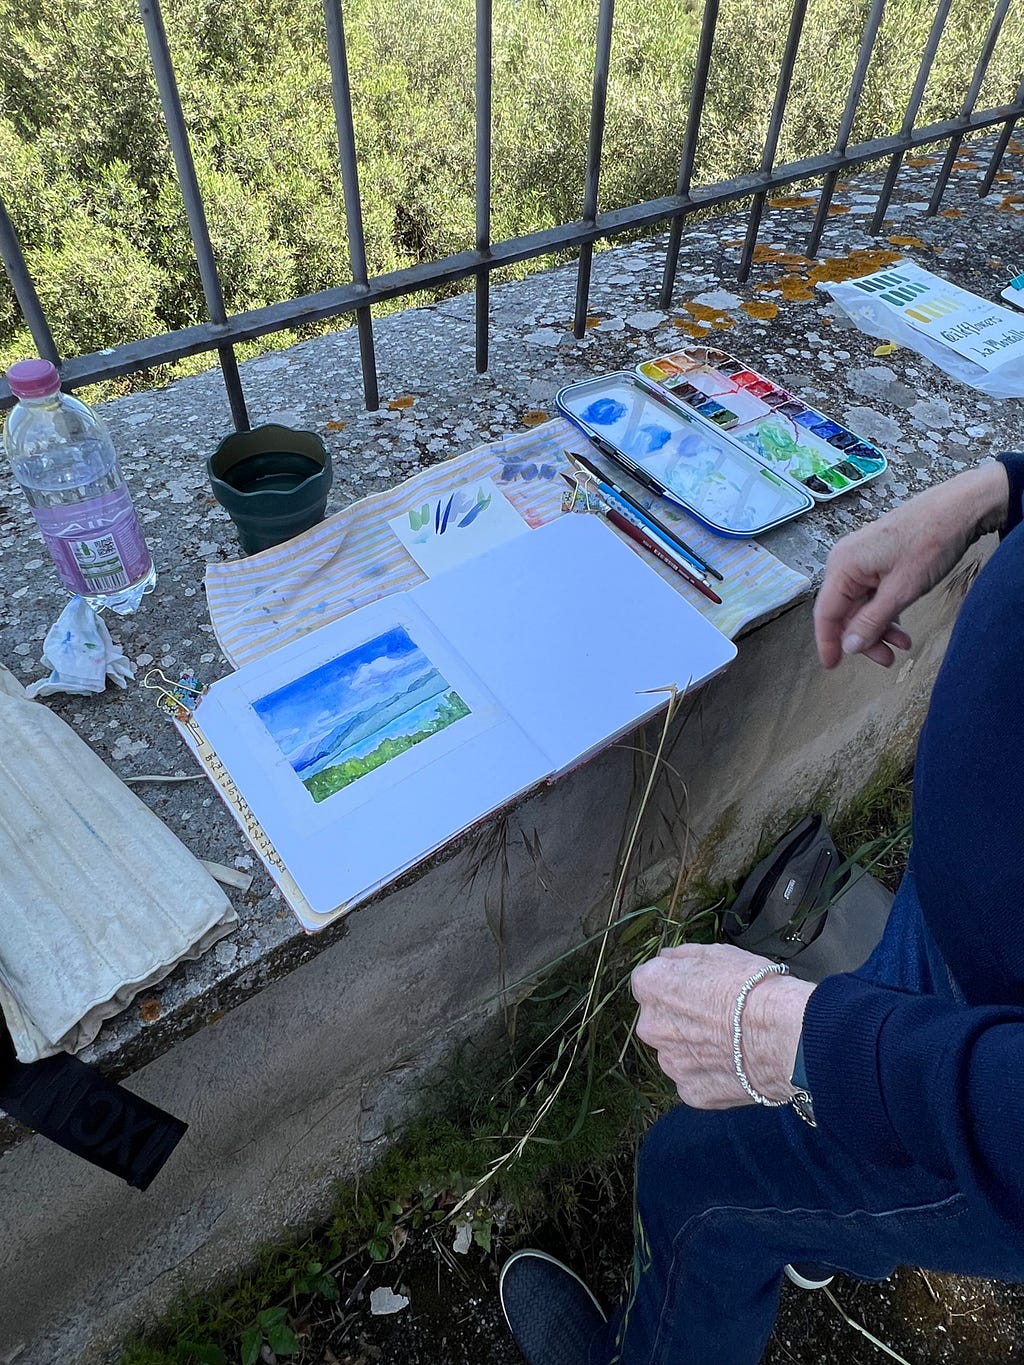 Photo of artist Roxanne Steed, painting “en plein air”… setup include watercolor journal, paint pallet, flexible watercup, scratch pad, and towel for dabbing paint brush.